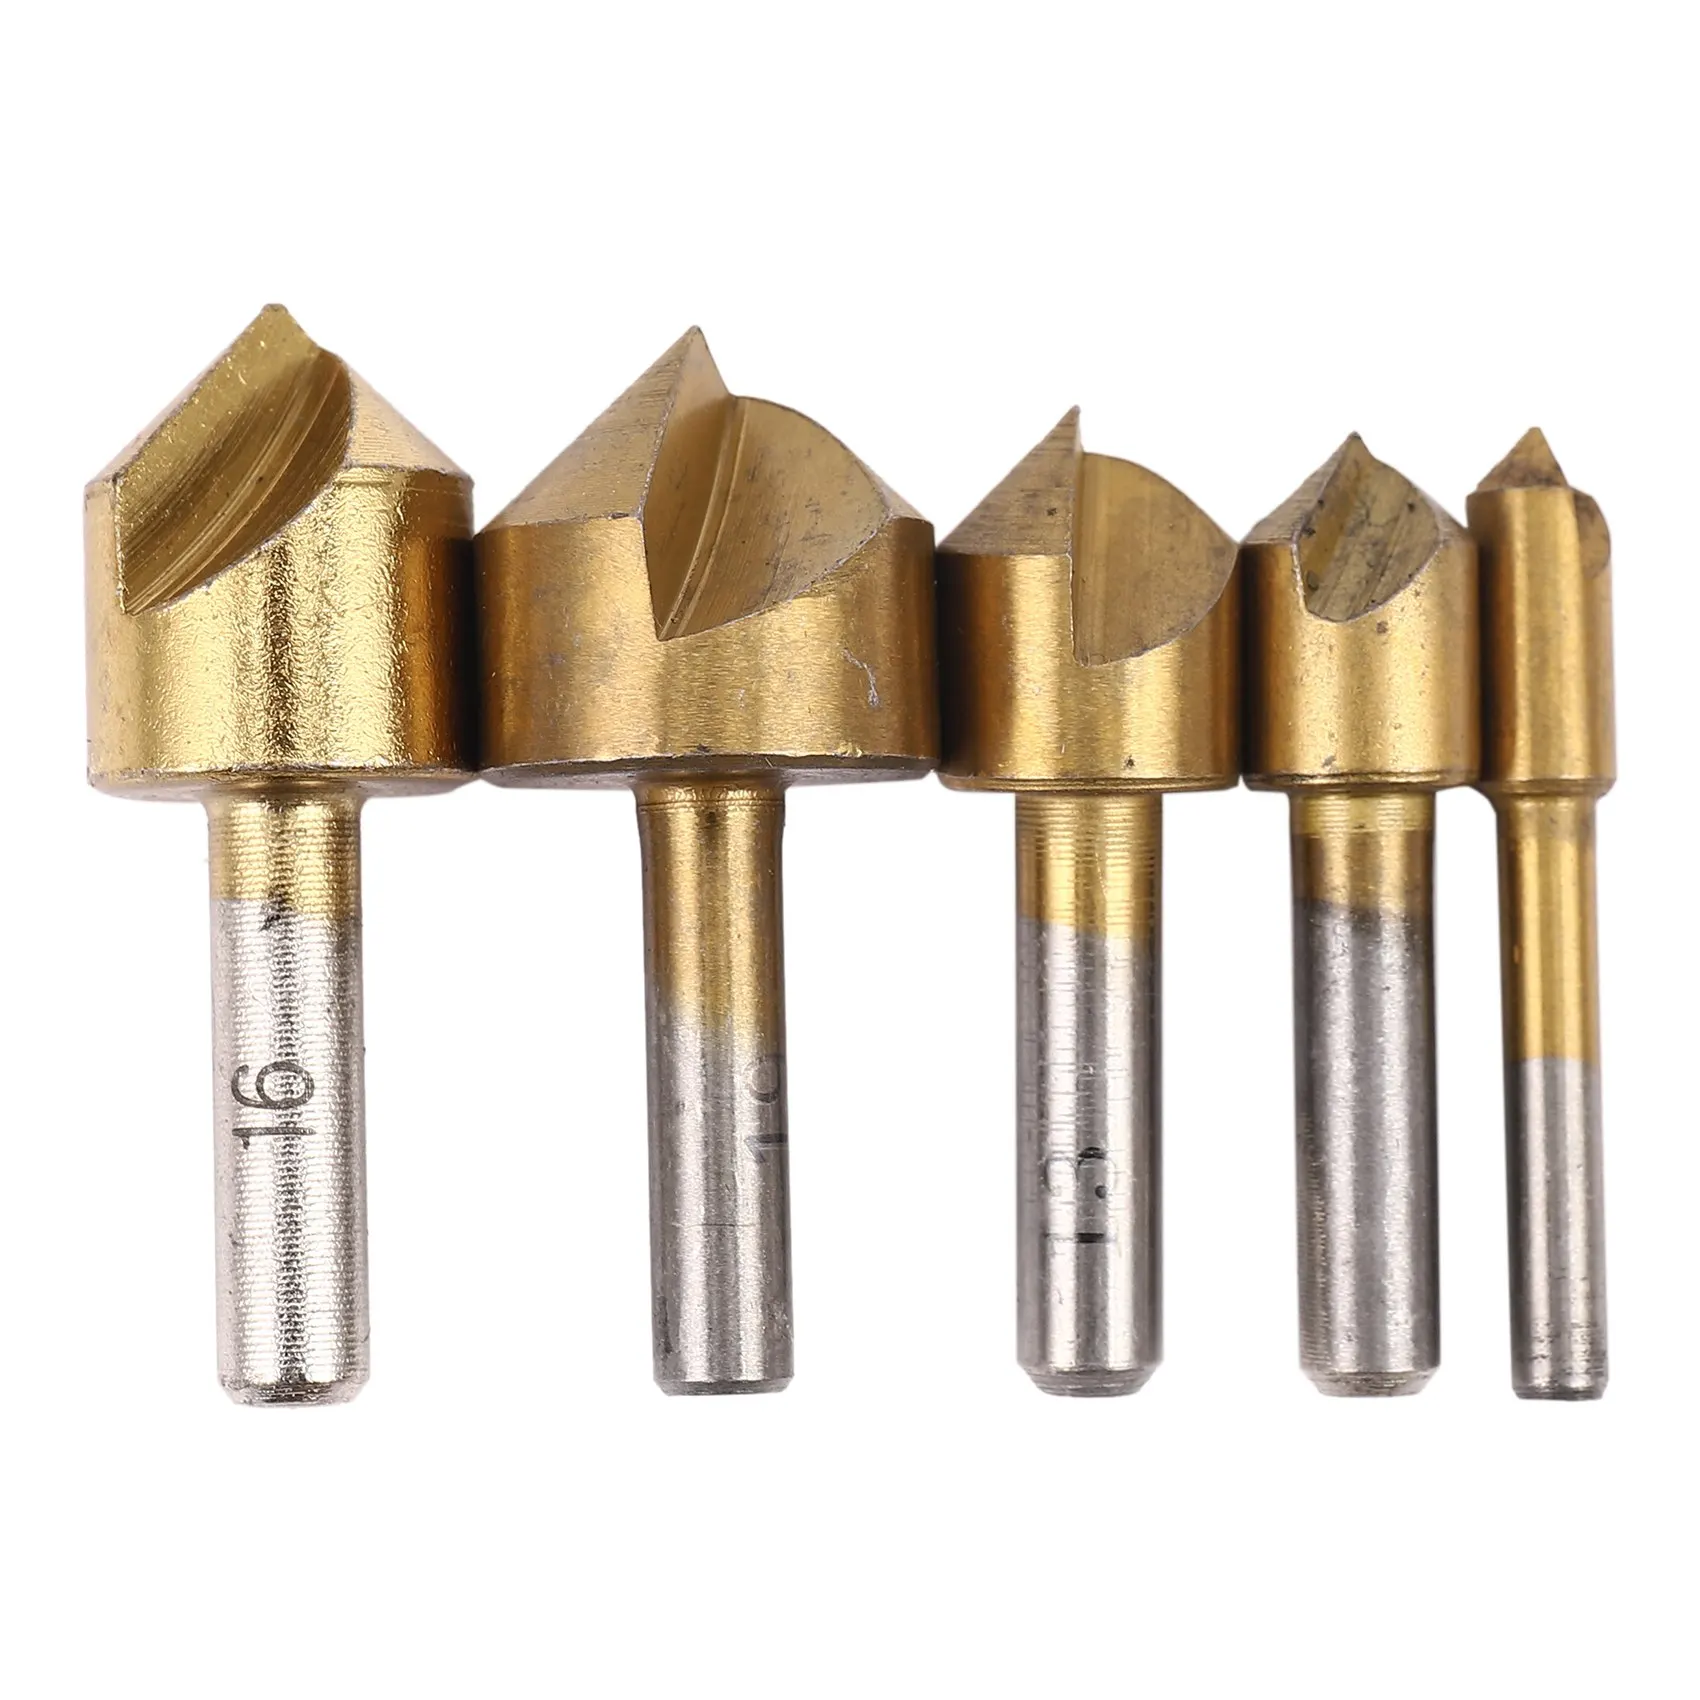 

5 Pc Chamfering Countersink Drill Bit Set - 1/4 to 3/4 inch - 6mm 10mm 13mm 16mm 19mm for Wood Metal Quick Change Drill Bit Set